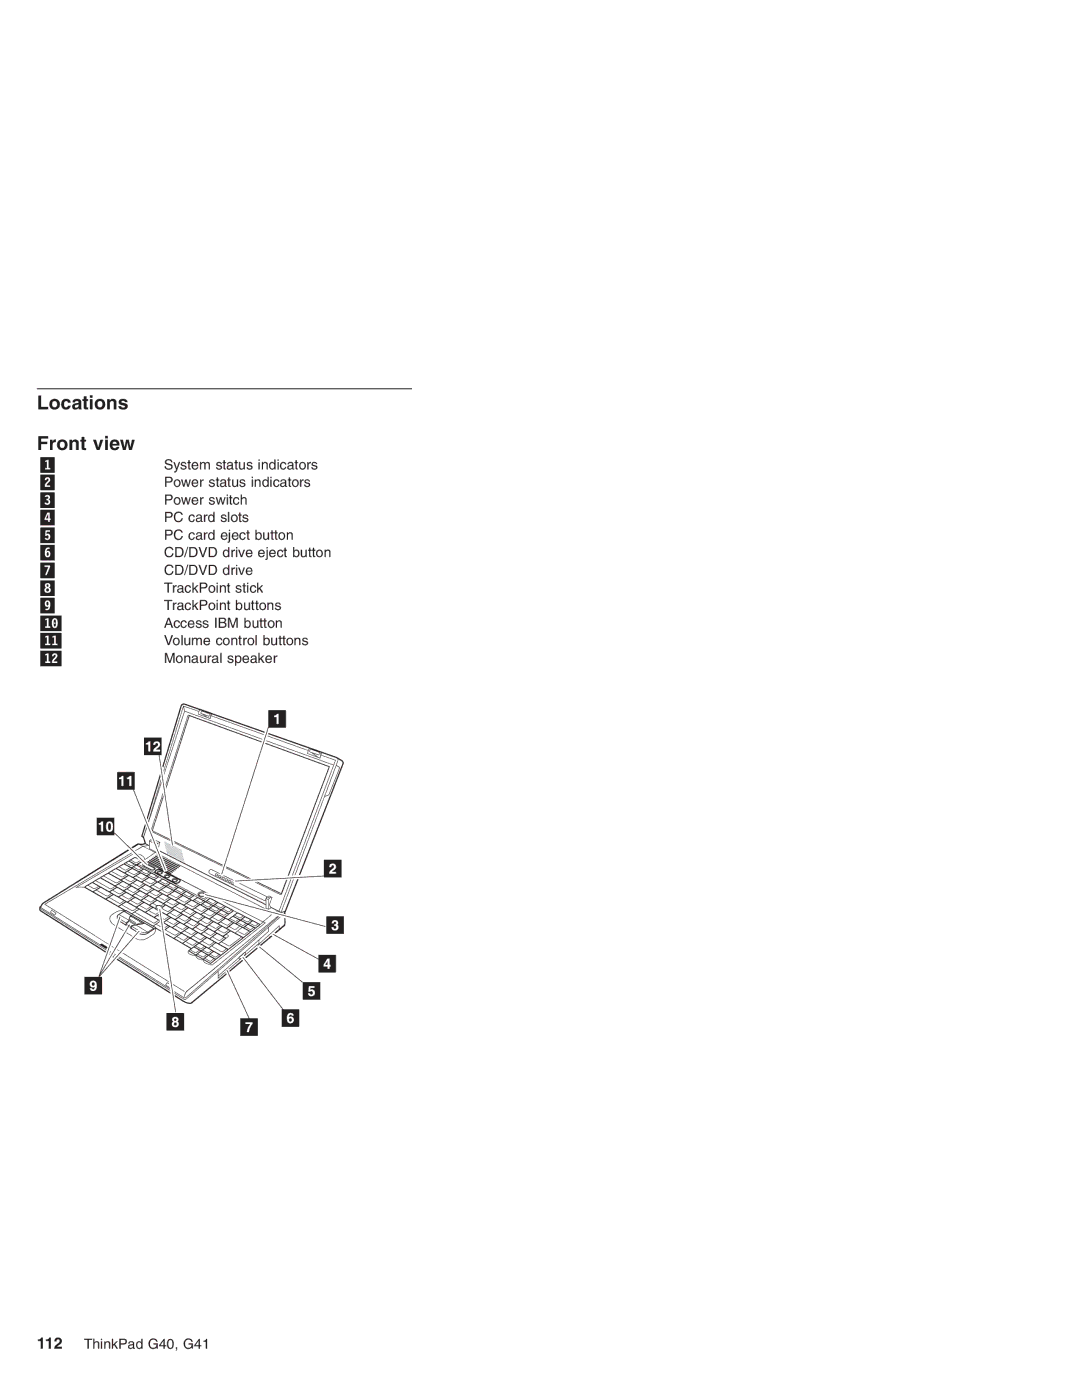 Lenovo G41 manual Locations Front view 